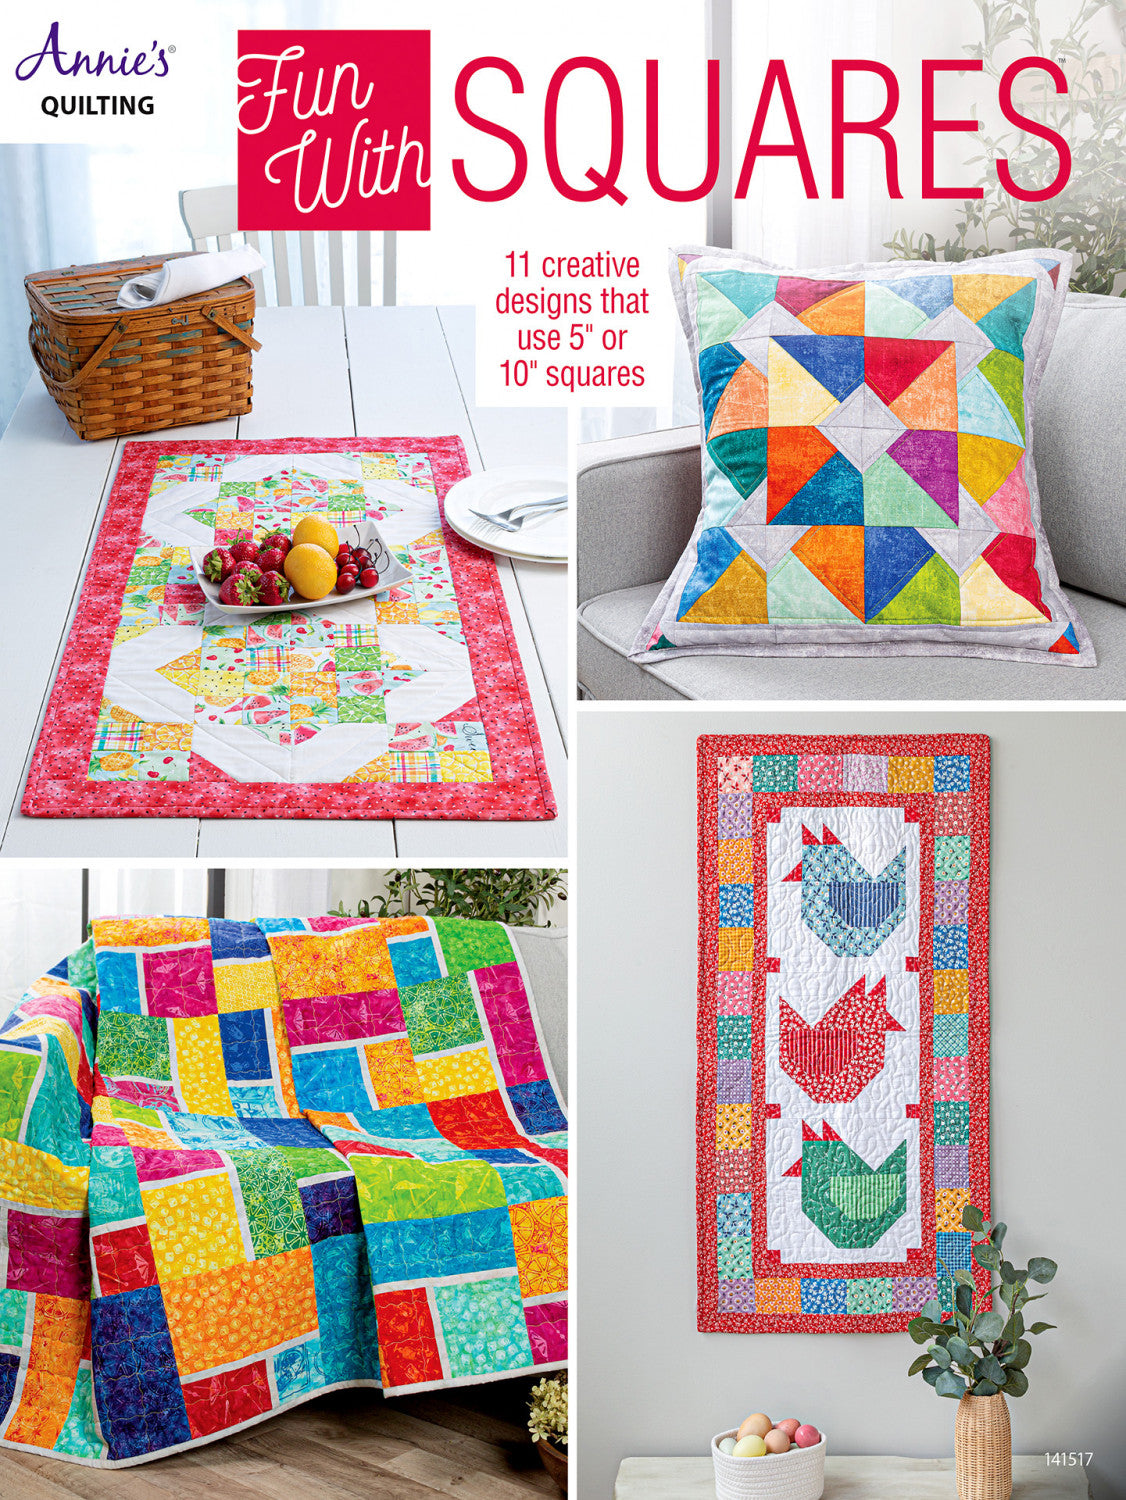 Fun with Squares- Annie's Quilting